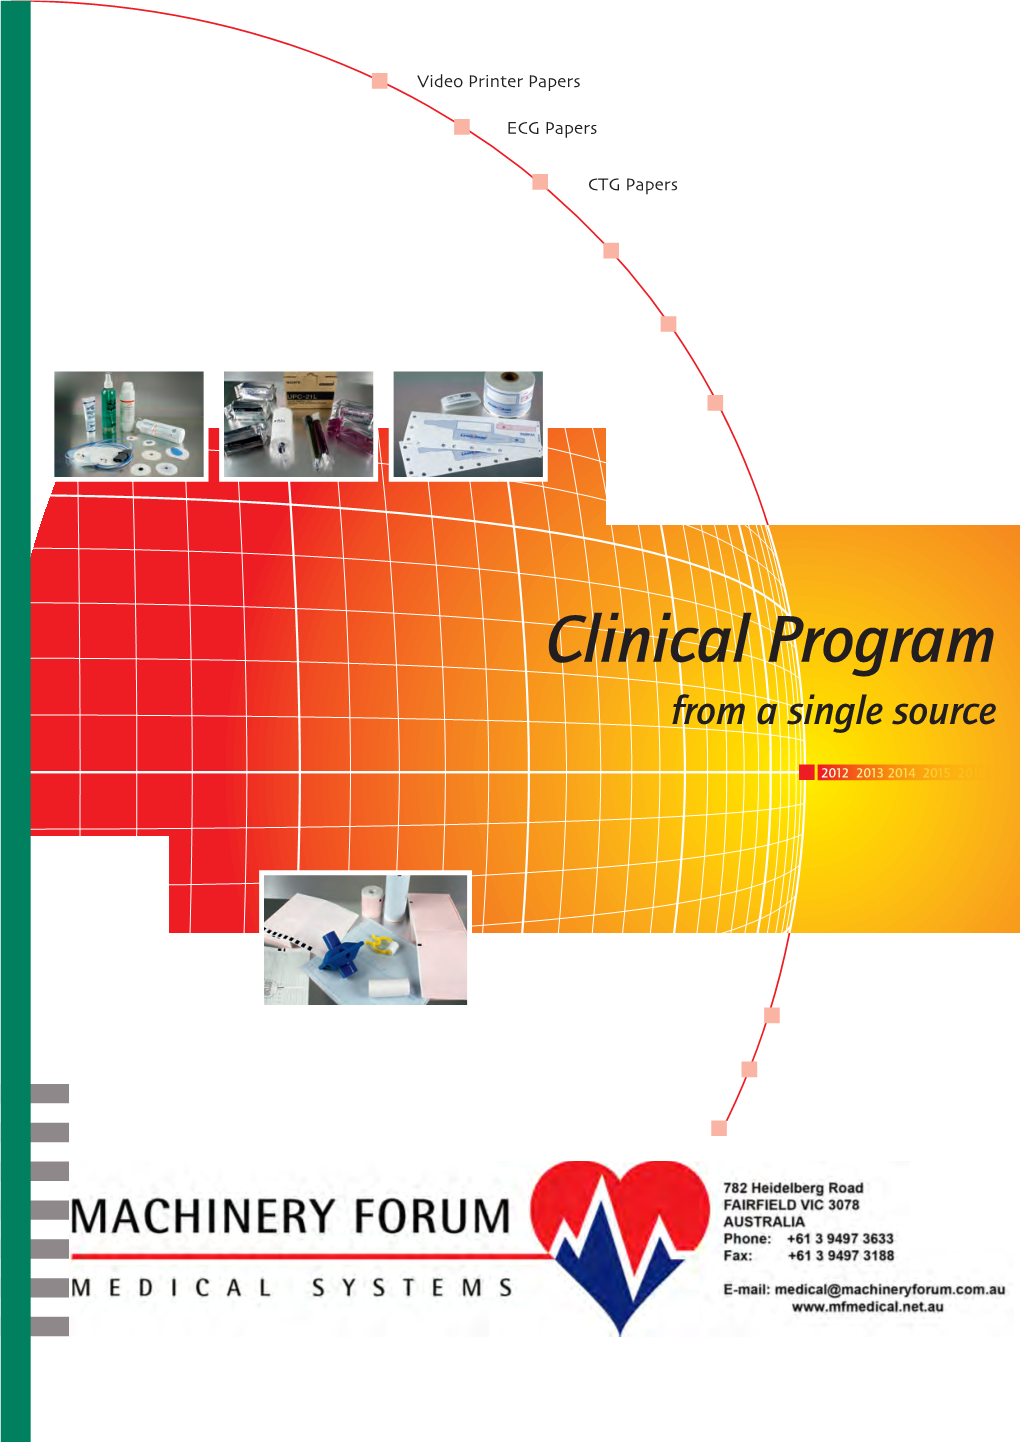 Clinical Program from a Single Source